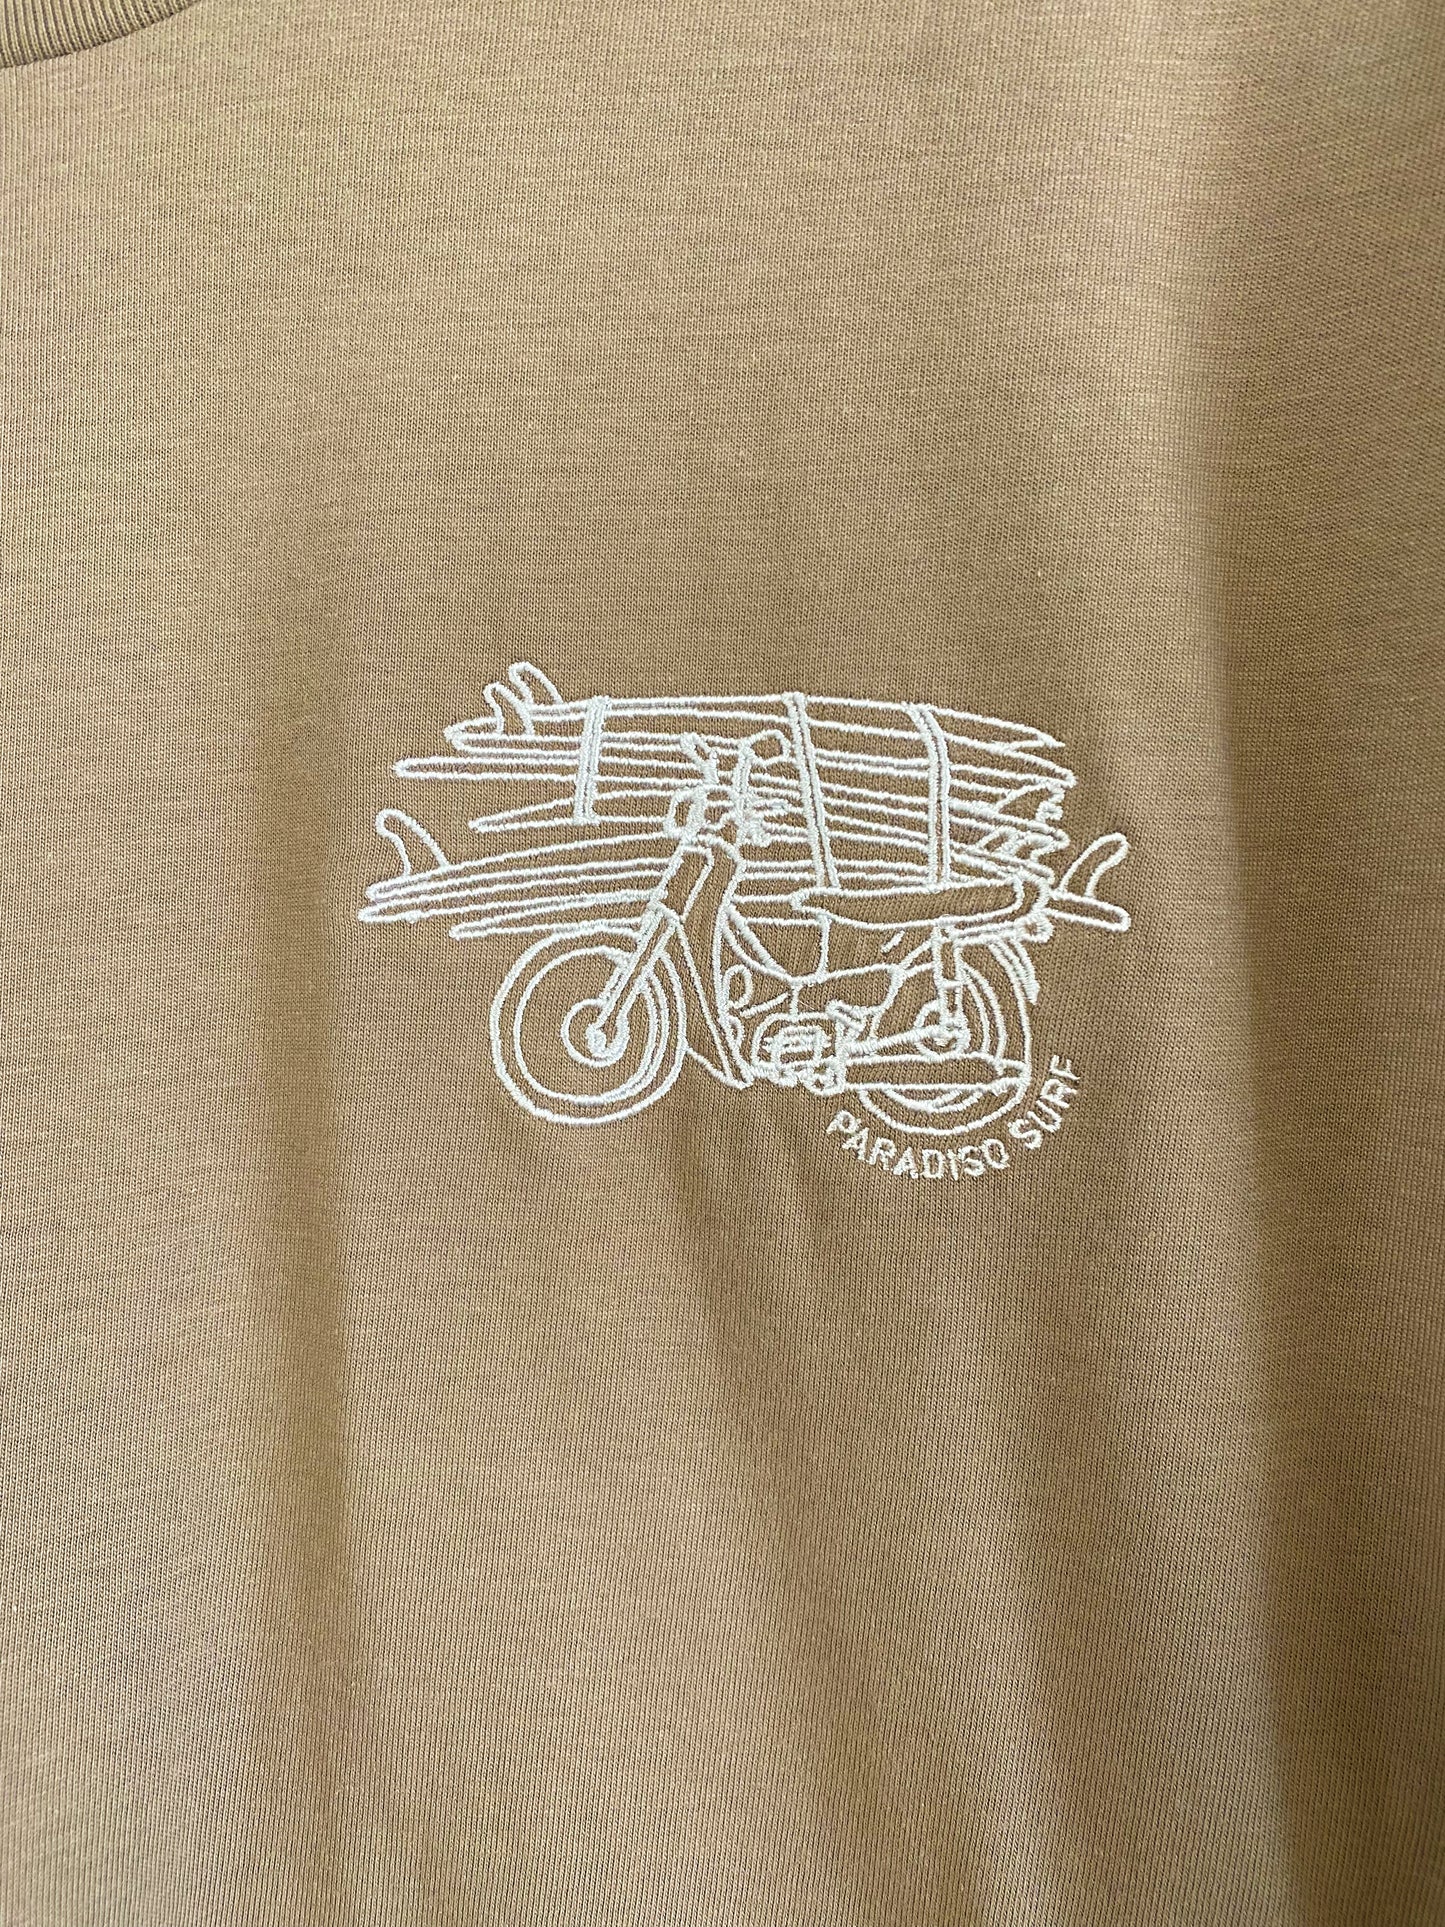 Embroidered Moped Tee